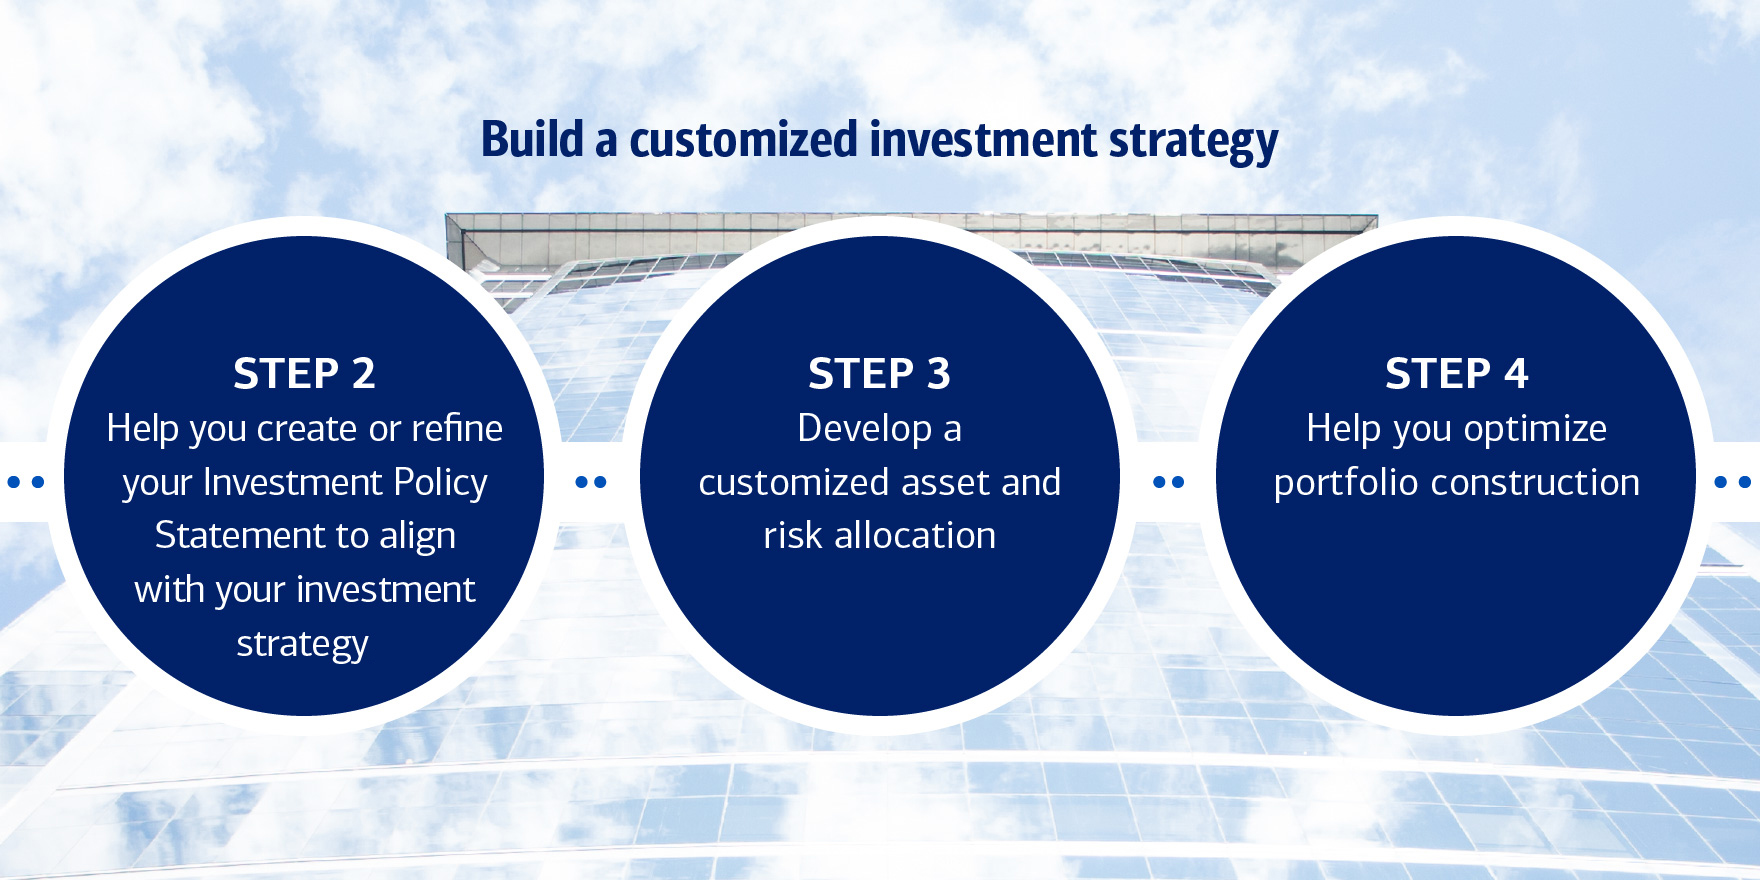 Build a customized investment strategy